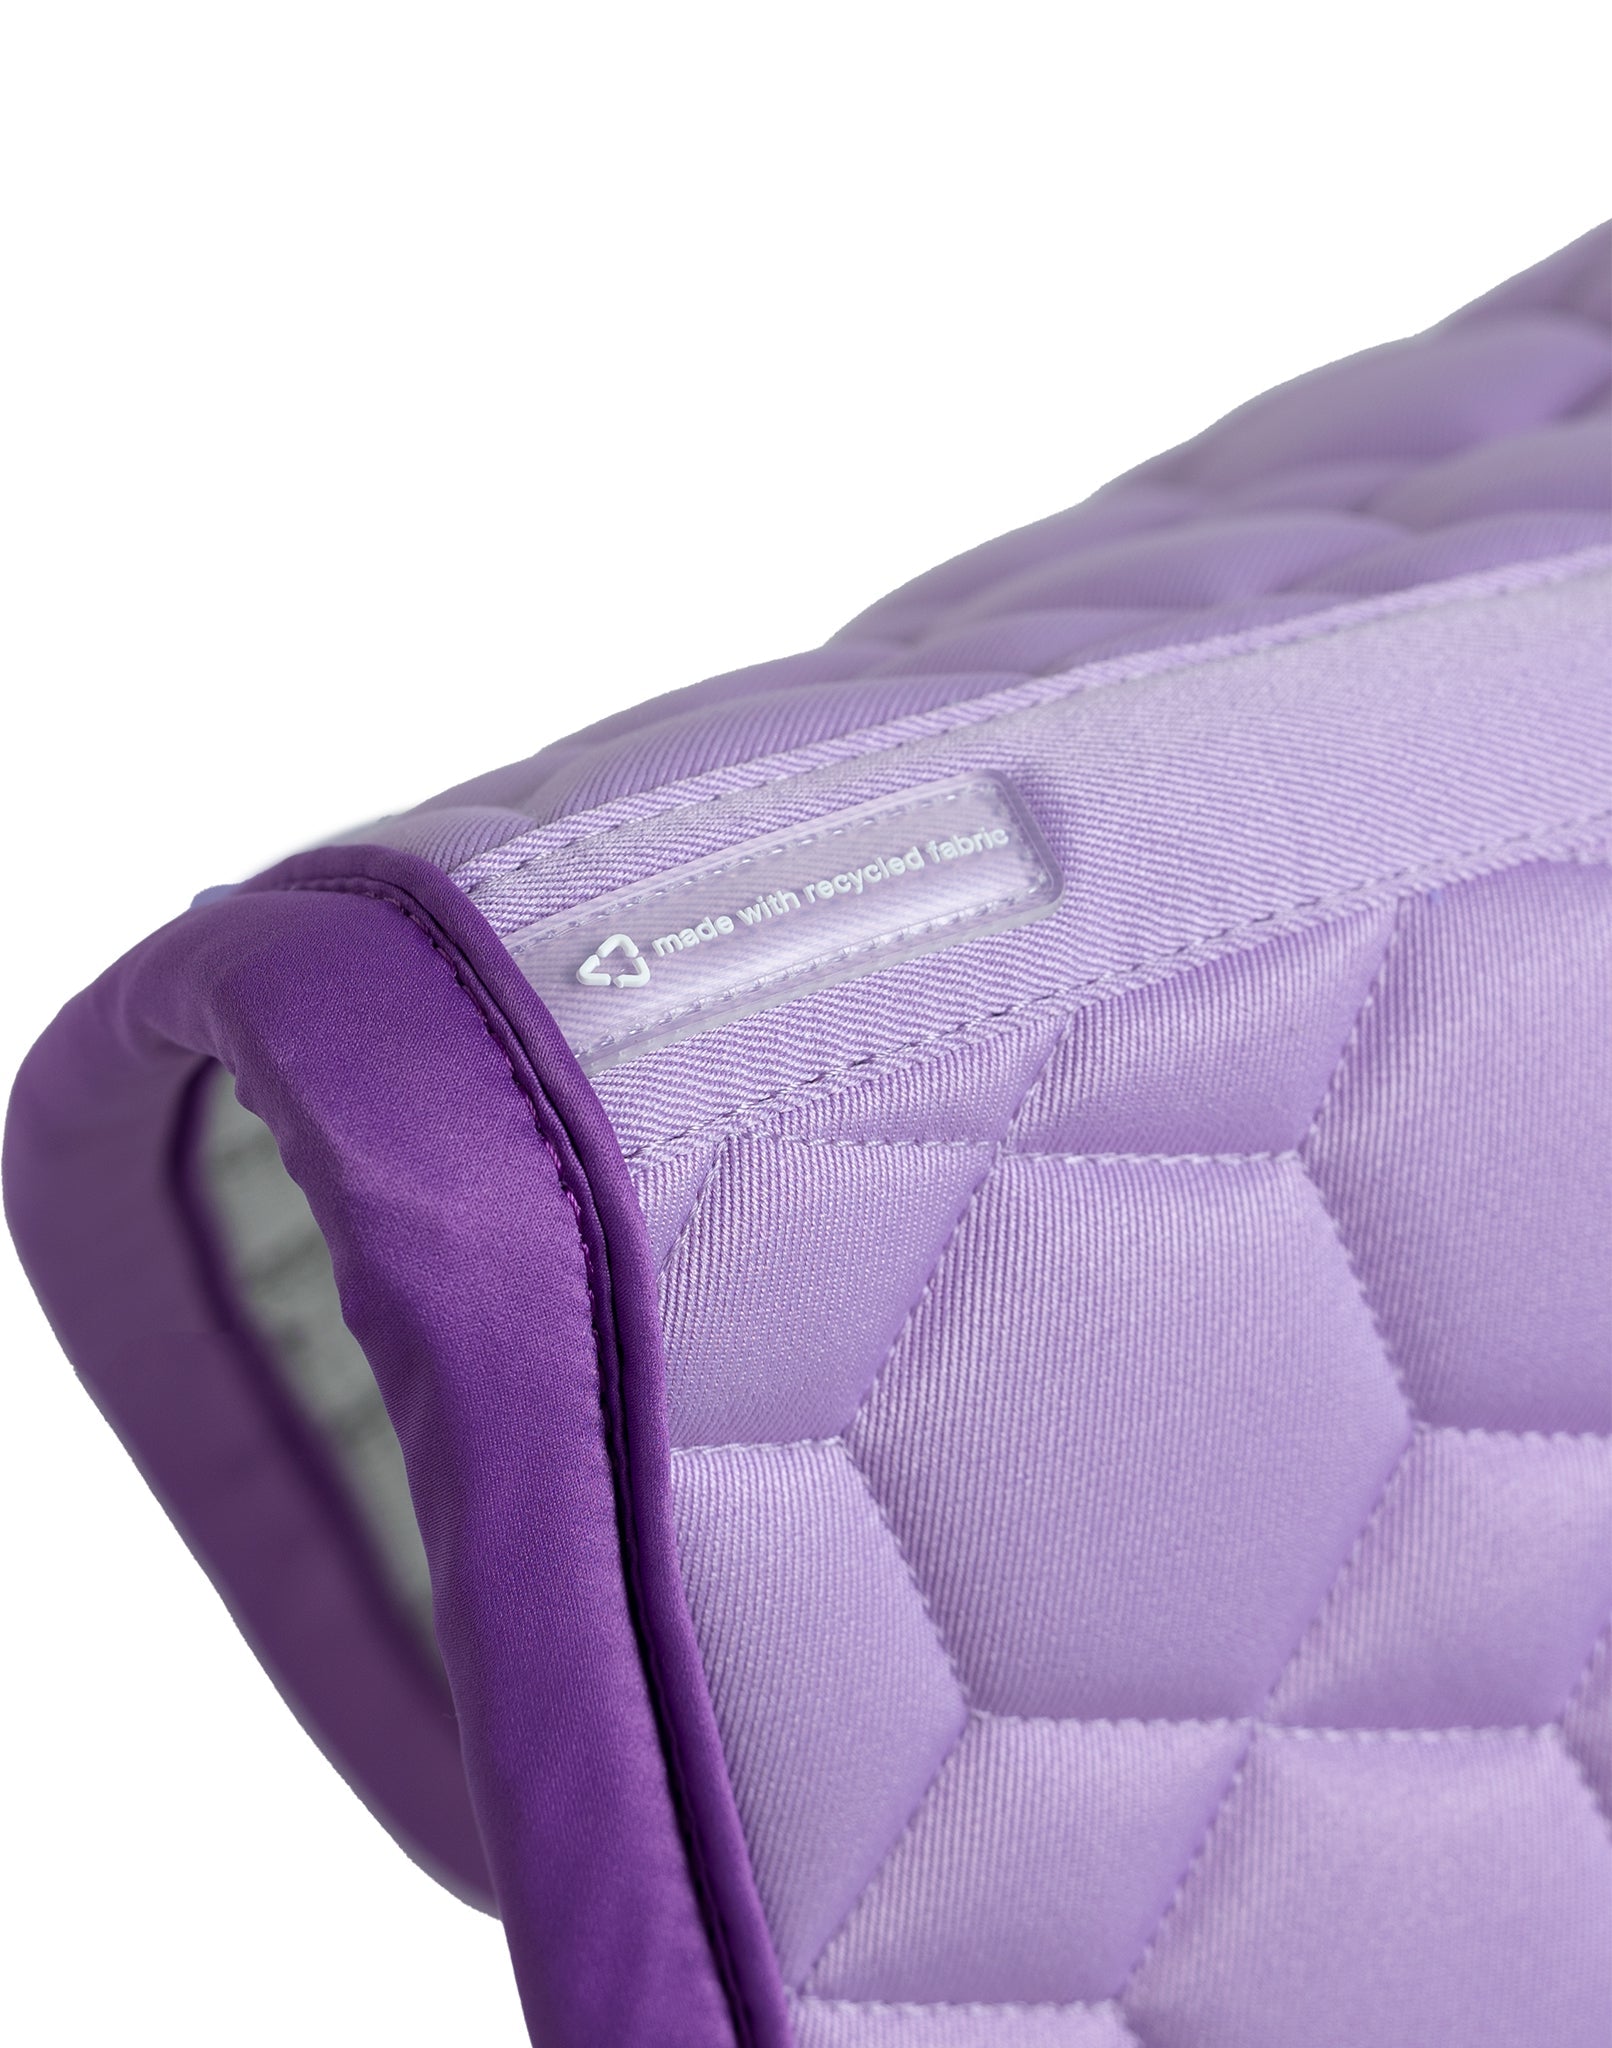 Recycled Dressage Saddle Pad - Lilac - Equiluxe Tack